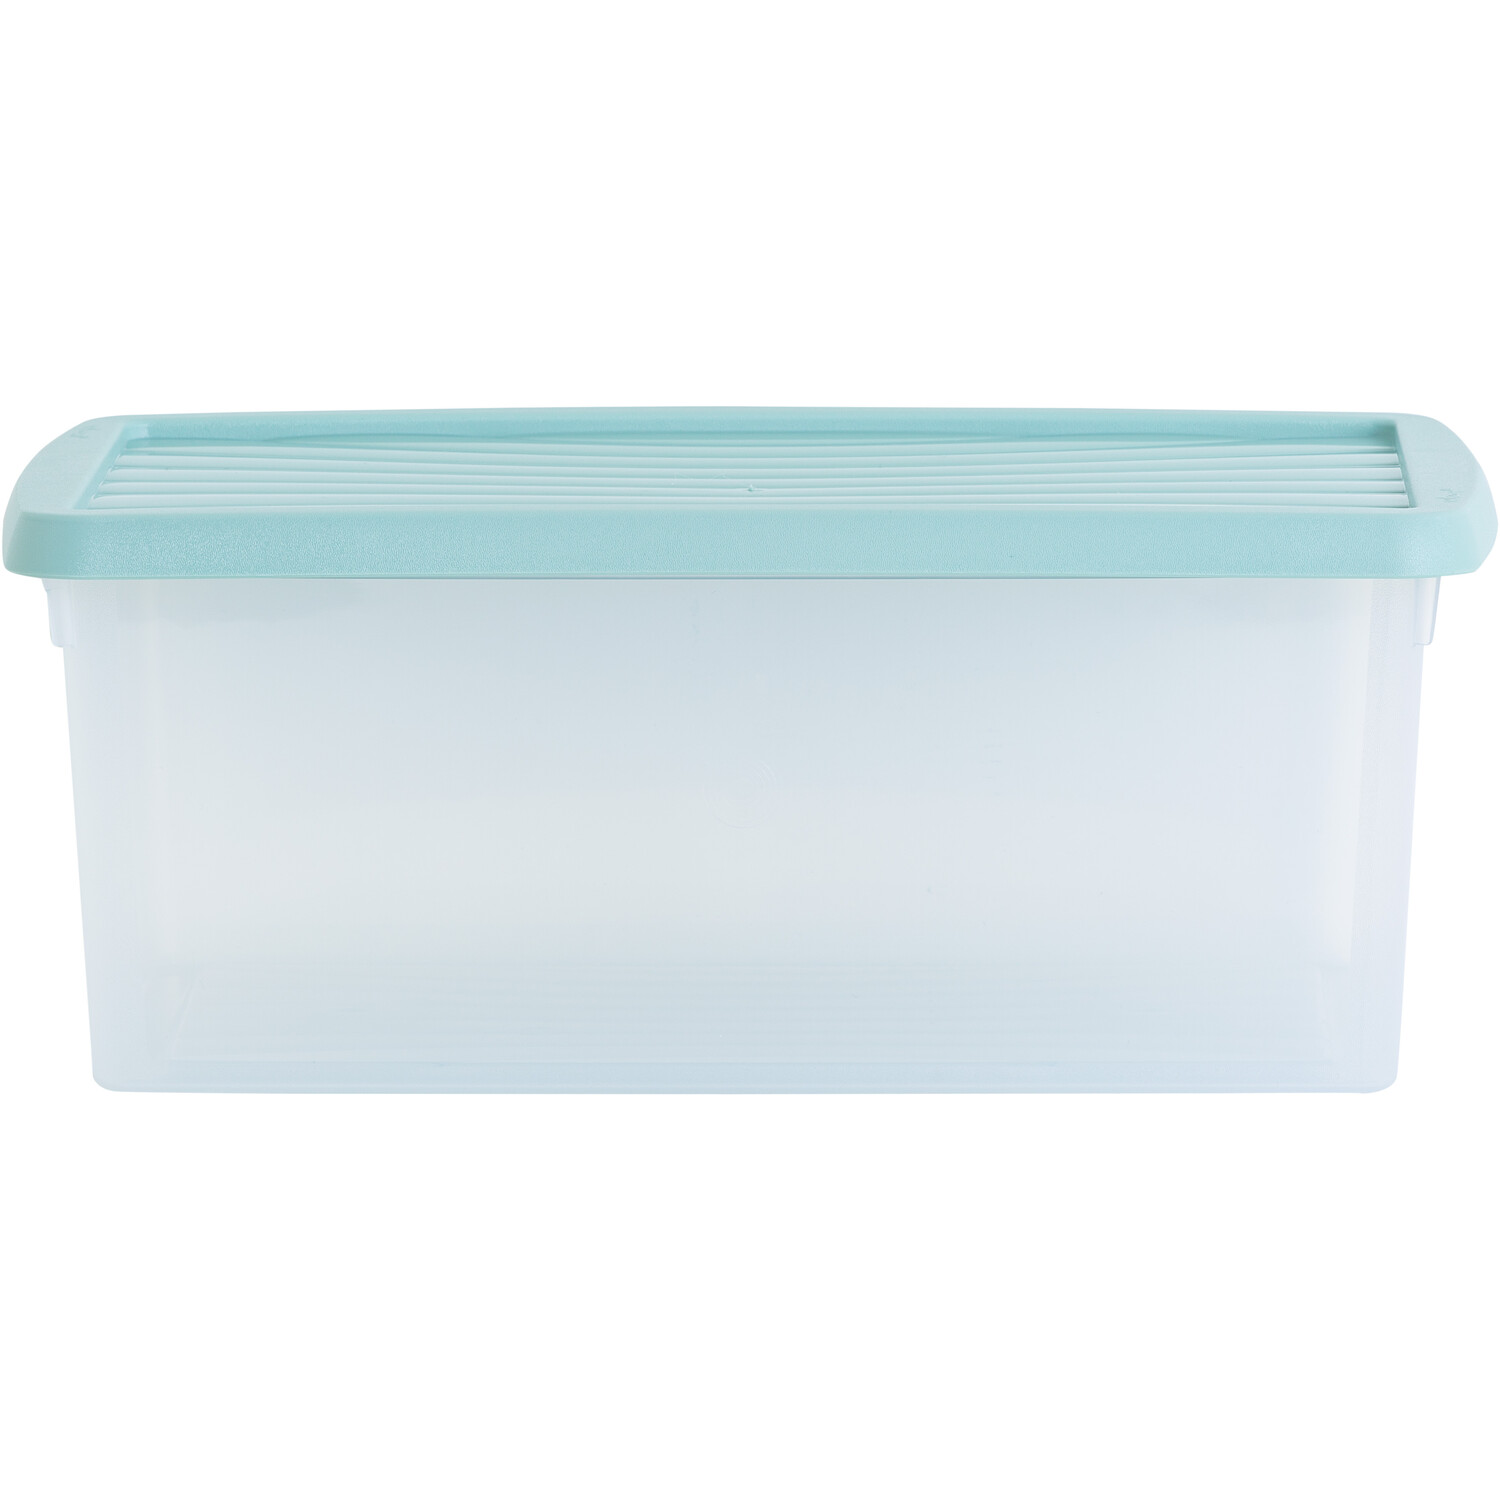 Single 9L Storage Box with Clip On Lid in Assorted styles Image 6